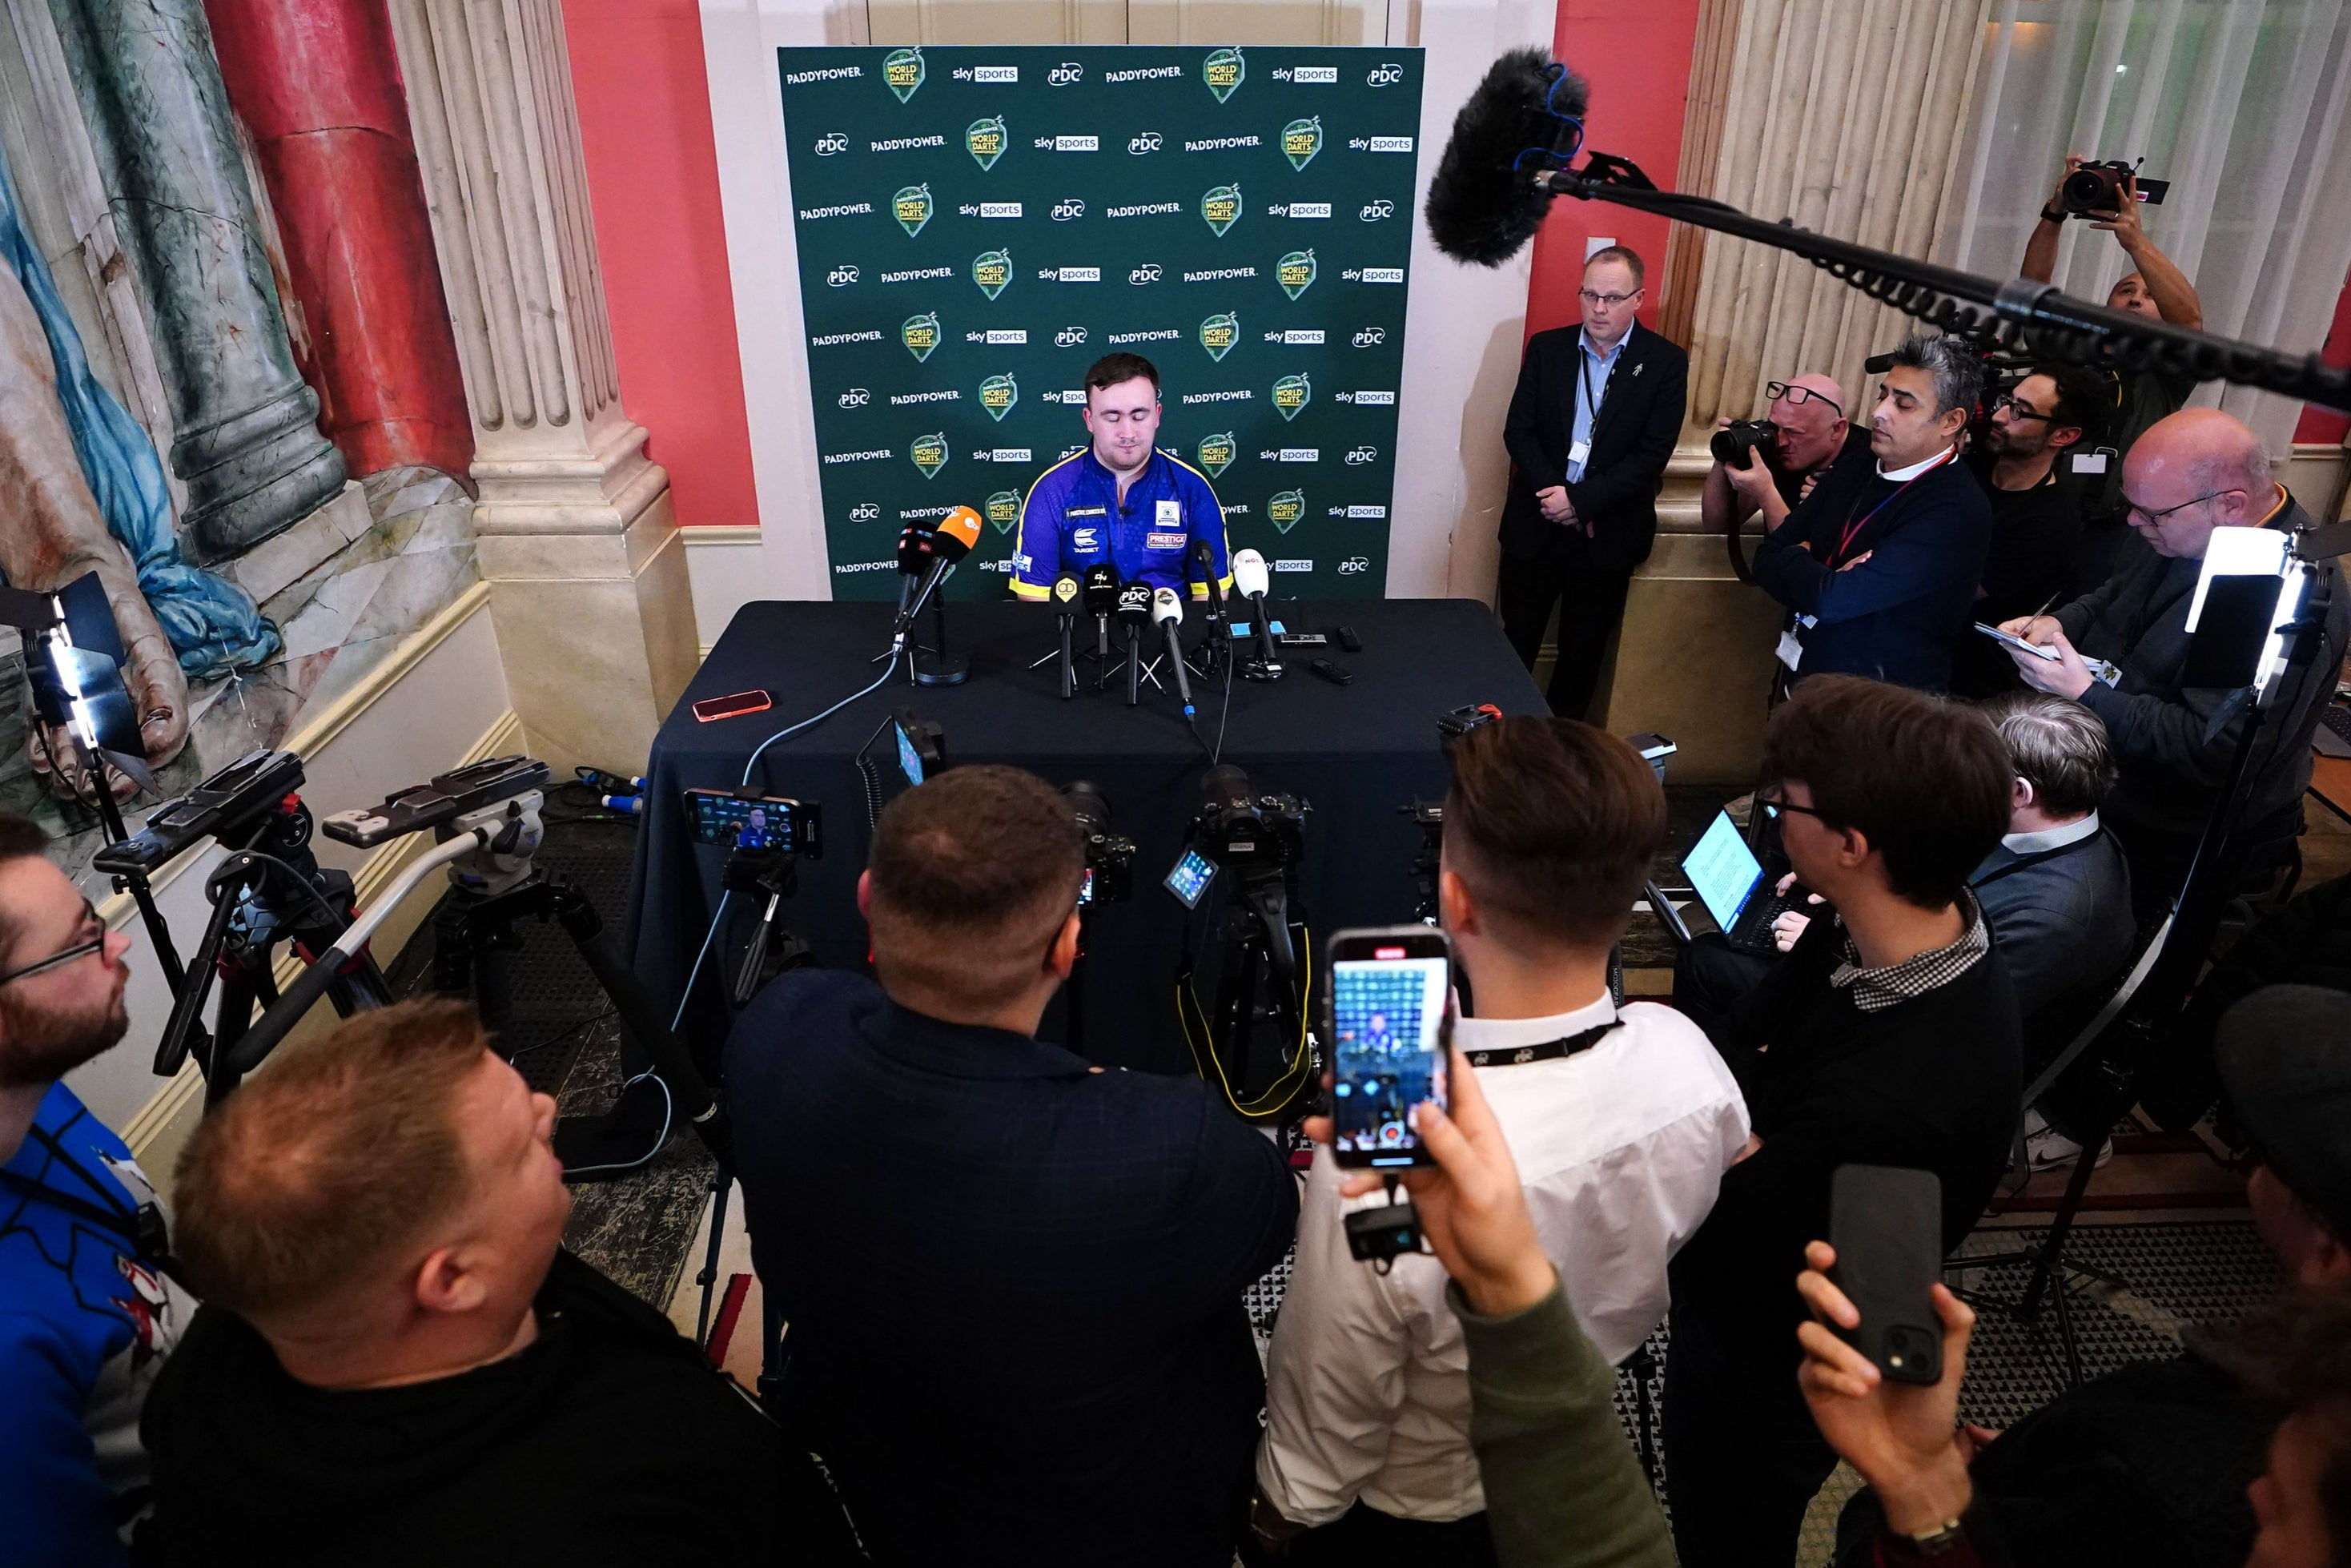 Luke Littler has become the centre of huge media attention during his run at the World Darts Championship